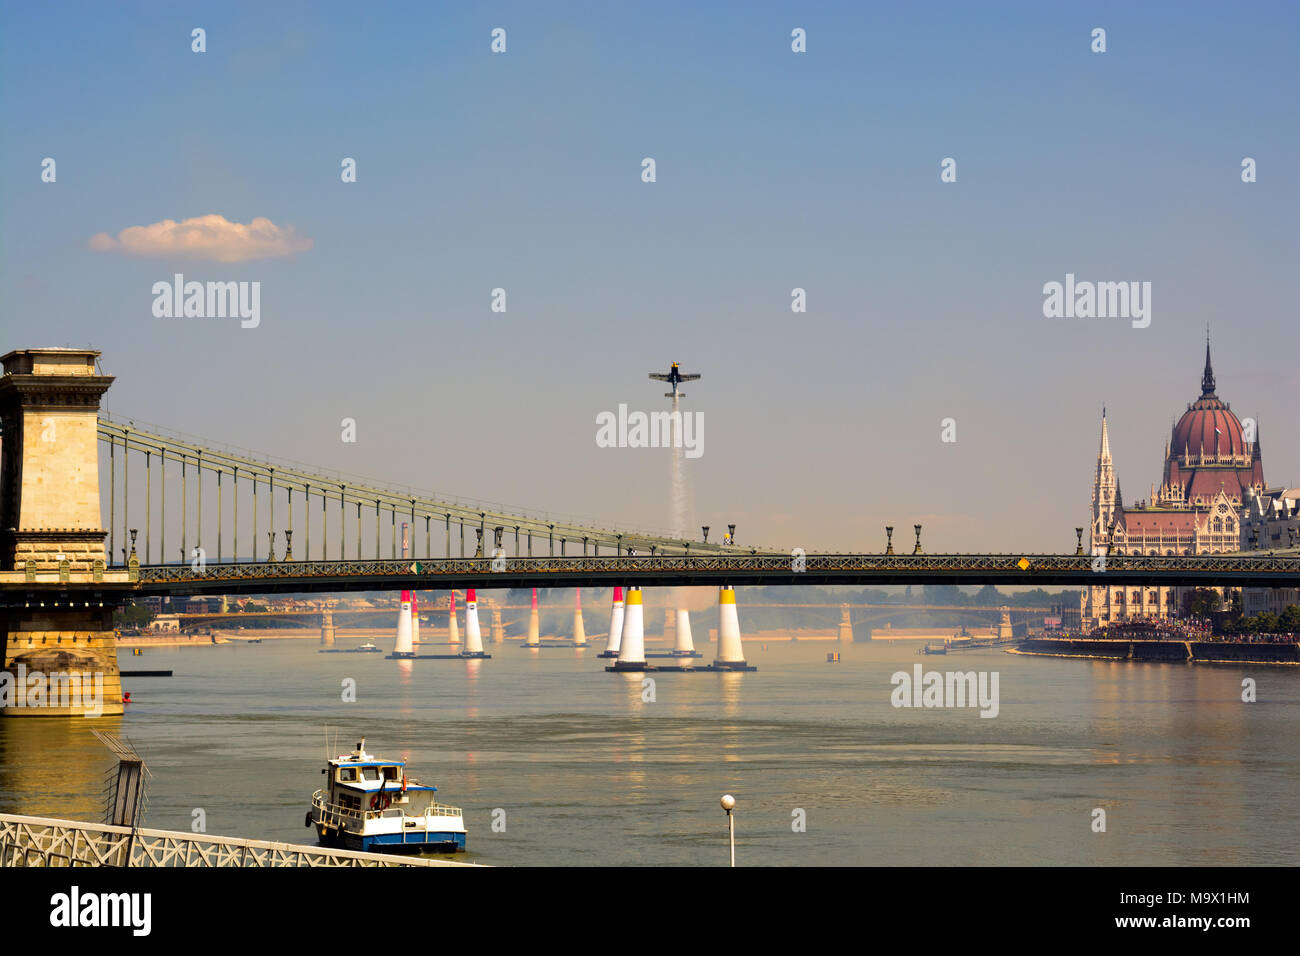 Air show in Budapest. Airplane soars up above Danube river and Chain bridge Stock Photo